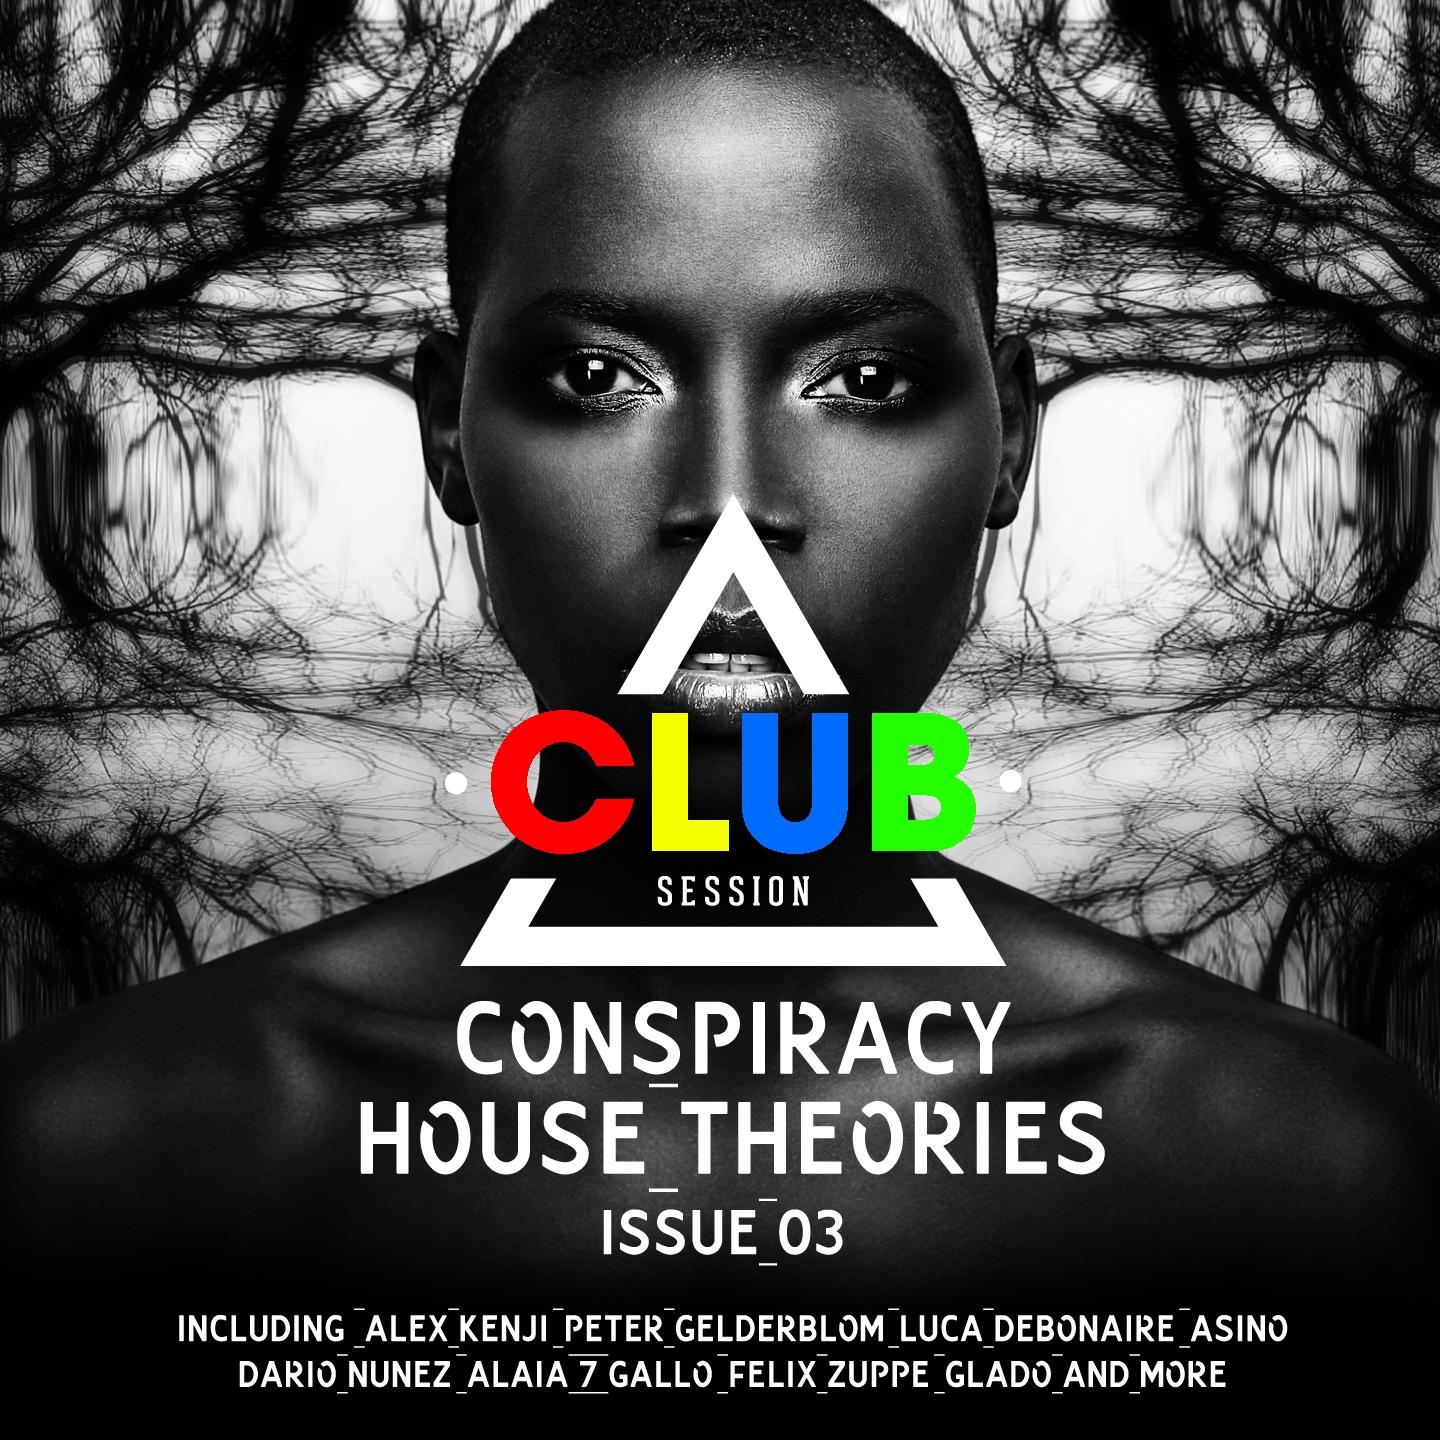 Conspiracy House Theories, Issue 03